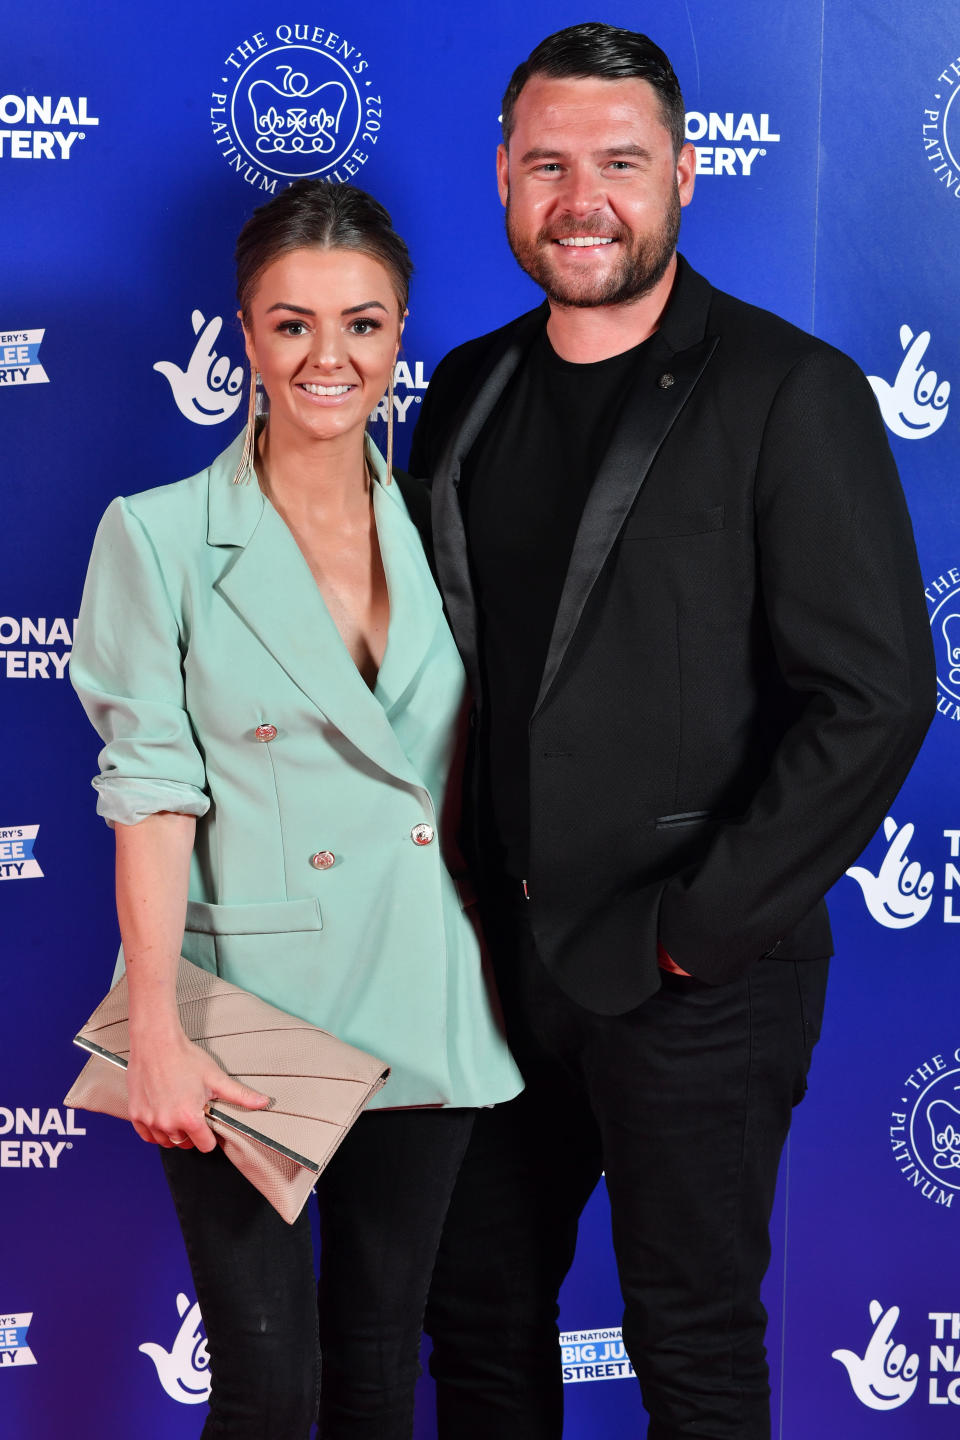 Danny Miller and his wife, Steph, pictured together, were appearing on Loose Women to discuss their fertility journey. (Getty Images)